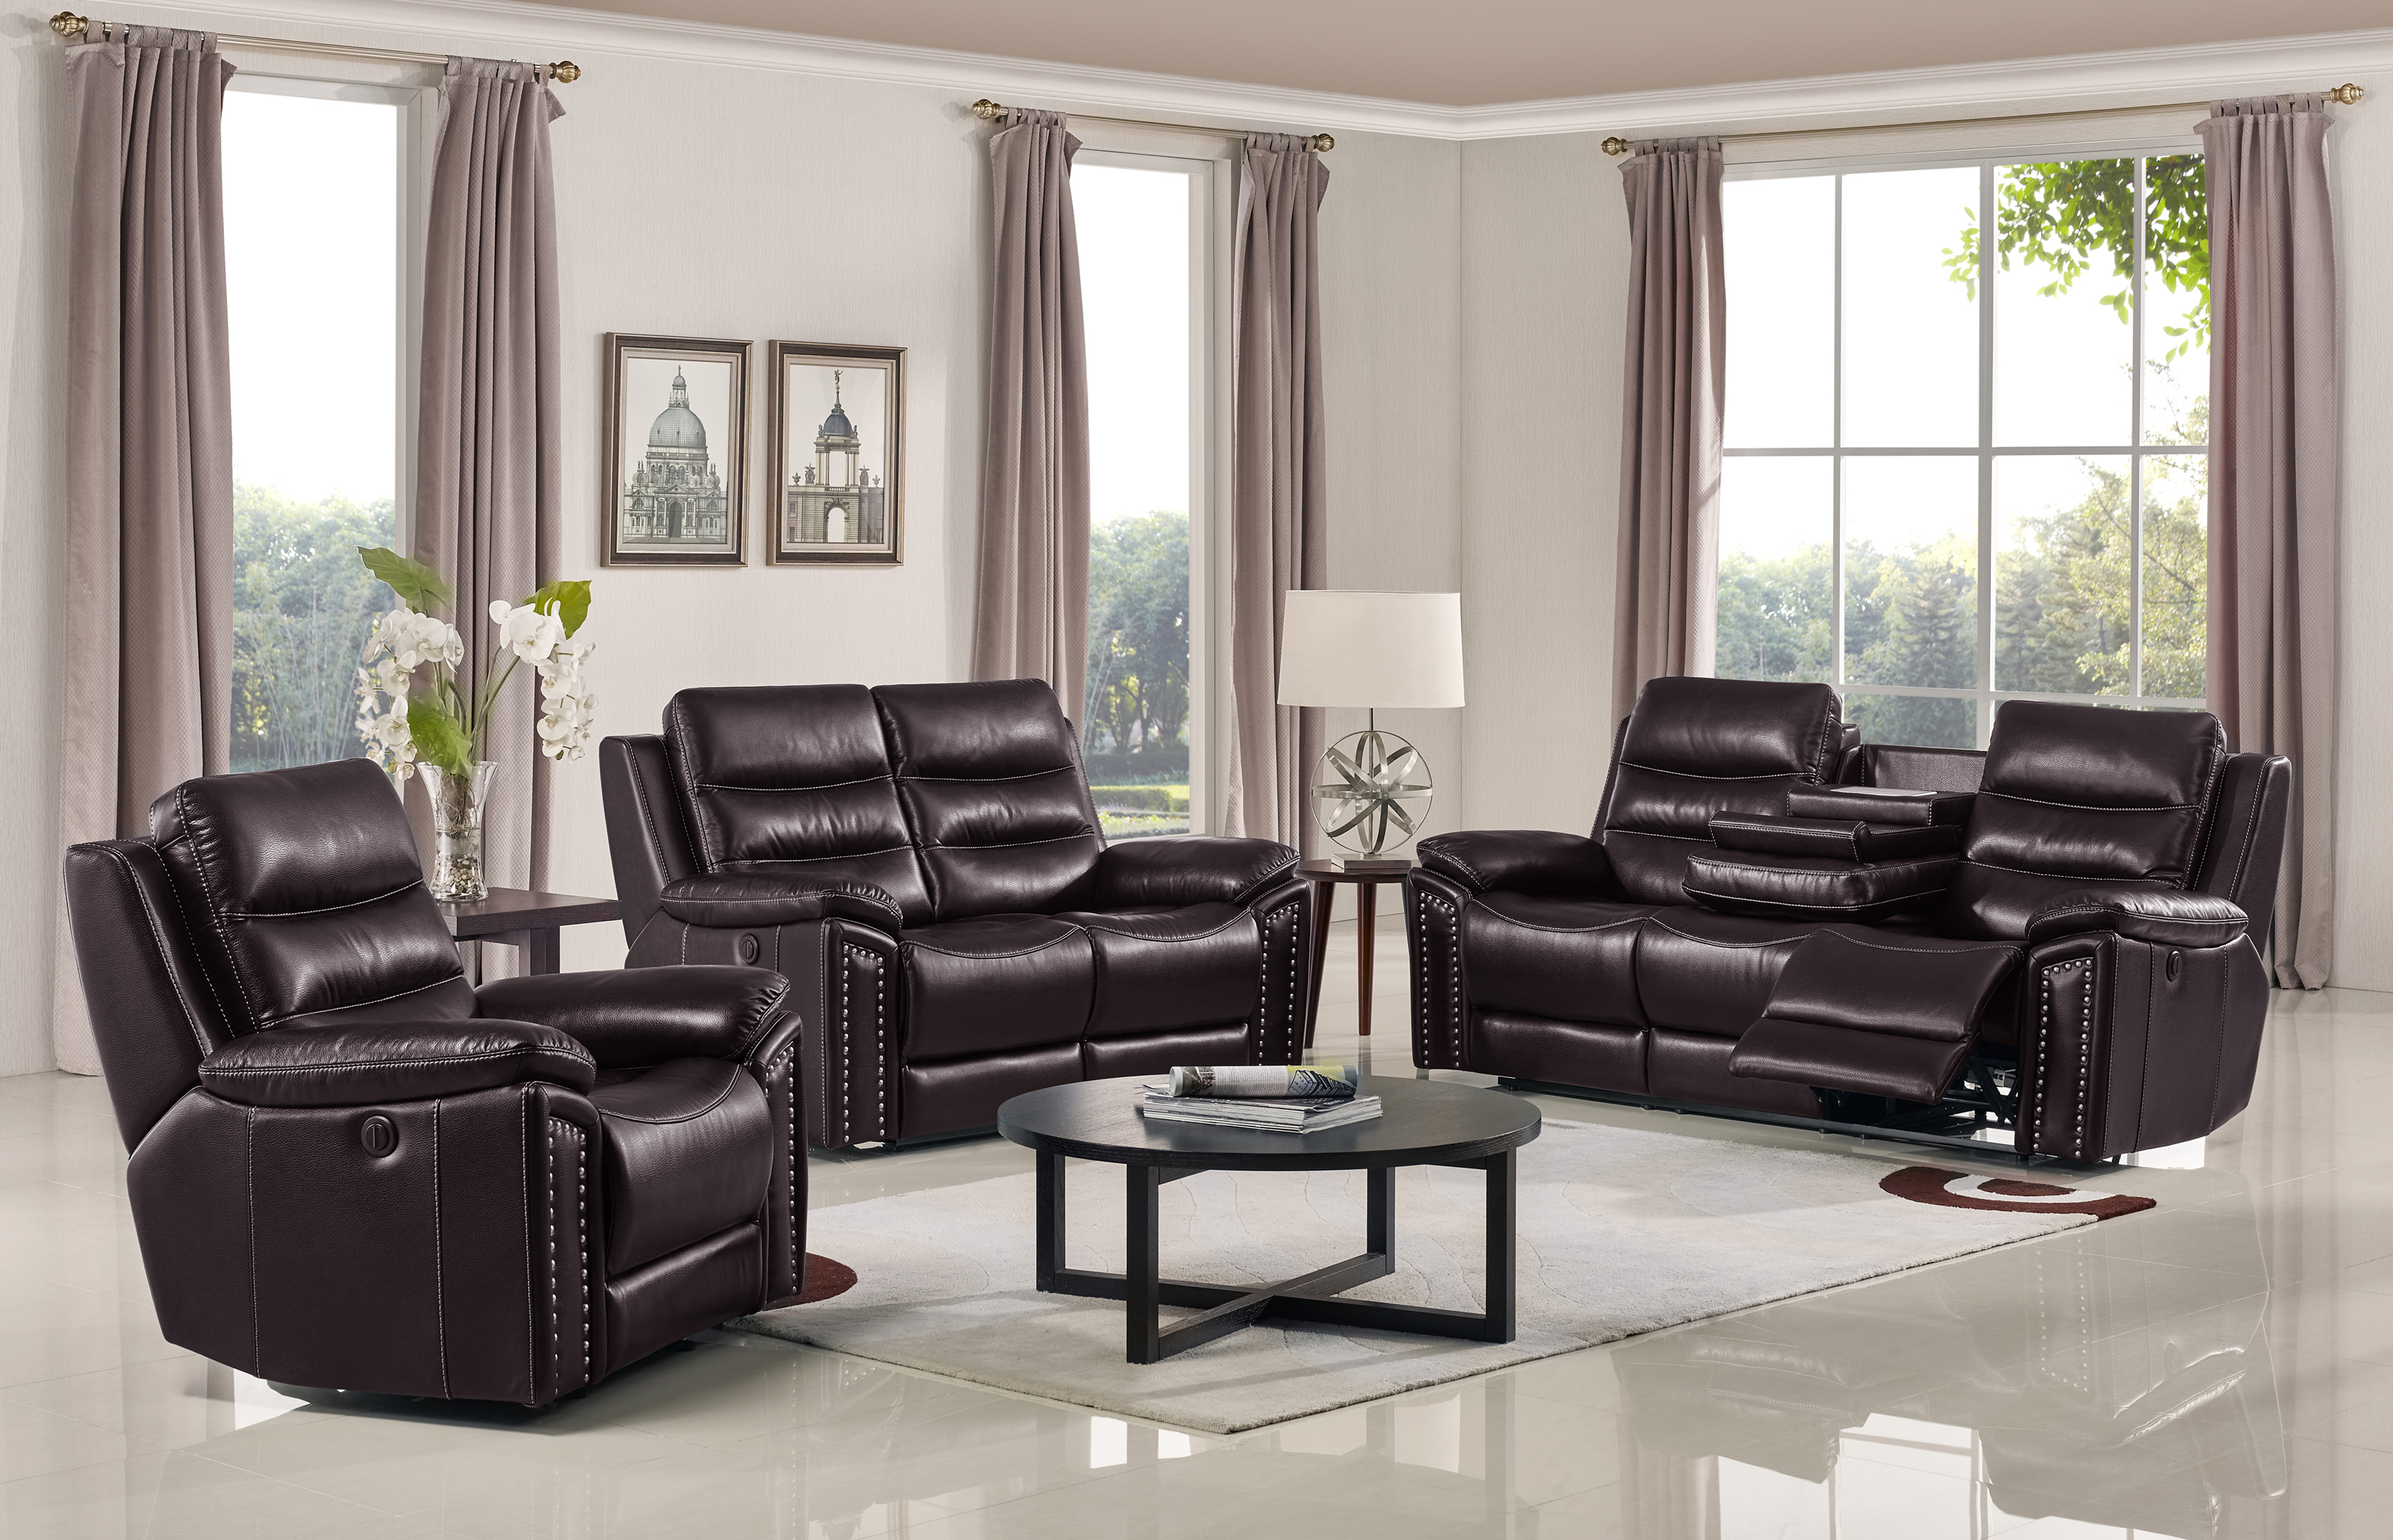 Jetson Reclining Sofa Leather Air Code G03 Brown Husky